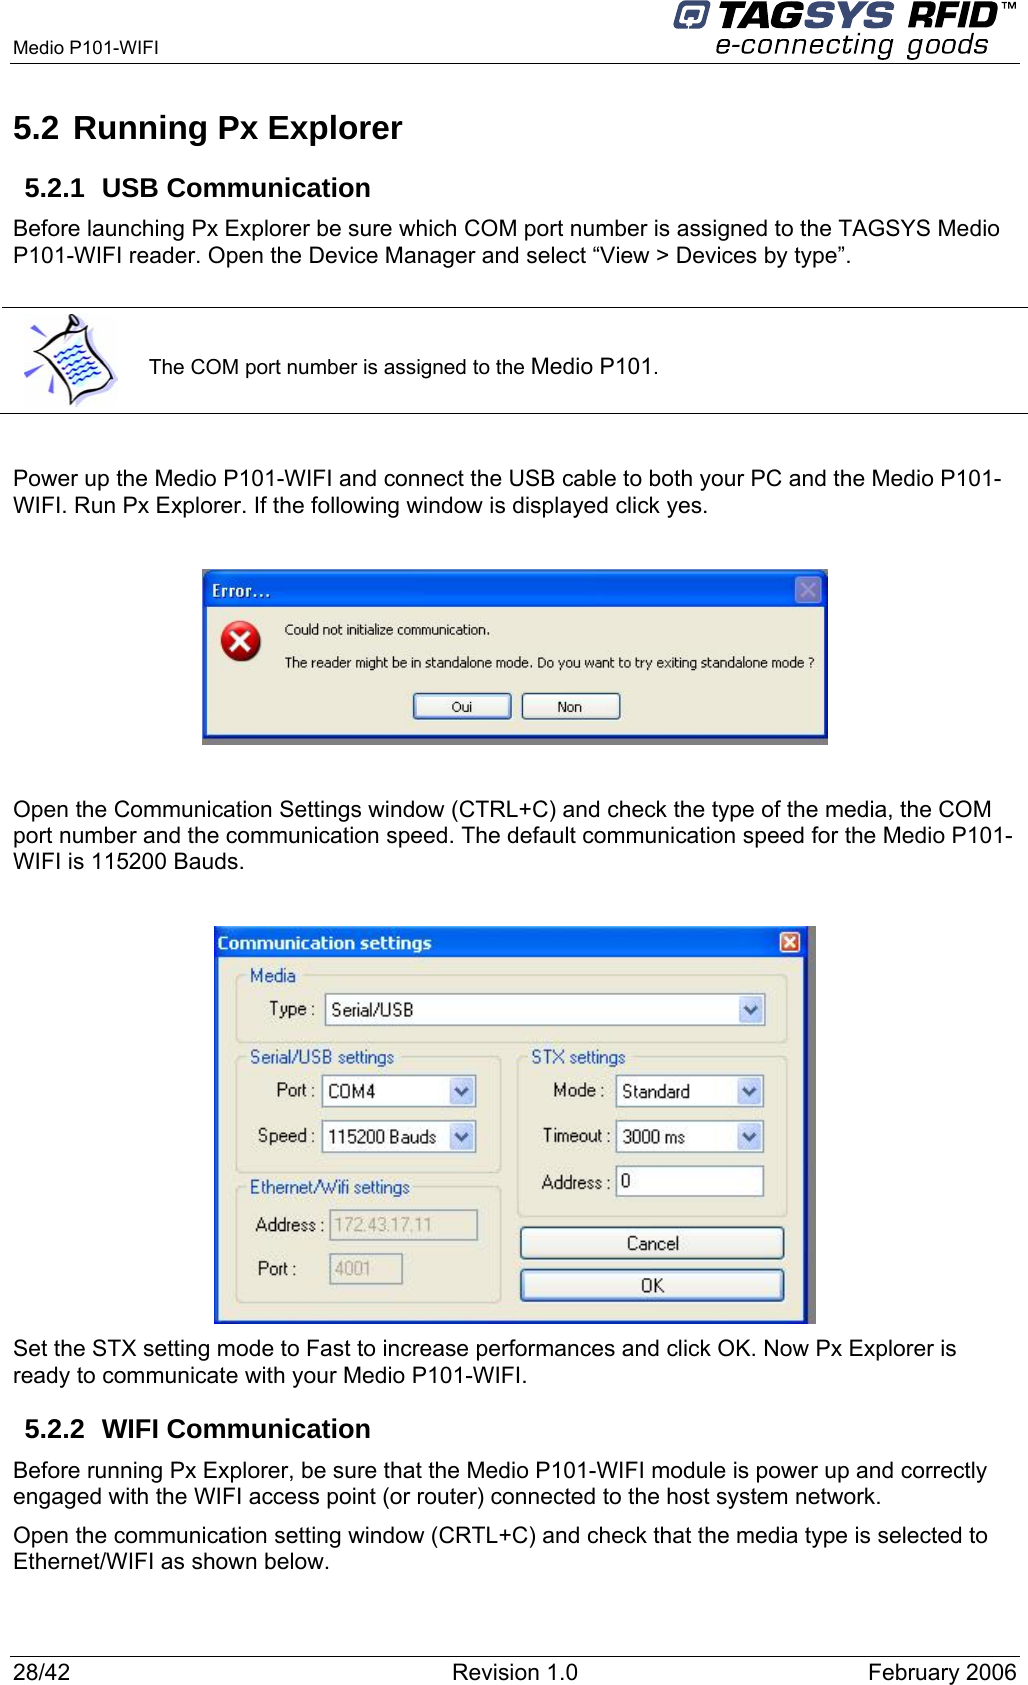  Medio P101-WIFI     28/42  Revision 1.0  February 2006 5.2 Running Px Explorer 5.2.1 USB Communication Before launching Px Explorer be sure which COM port number is assigned to the TAGSYS Medio P101-WIFI reader. Open the Device Manager and select “View &gt; Devices by type”.   The COM port number is assigned to the Medio P101.  Power up the Medio P101-WIFI and connect the USB cable to both your PC and the Medio P101-WIFI. Run Px Explorer. If the following window is displayed click yes.    Open the Communication Settings window (CTRL+C) and check the type of the media, the COM port number and the communication speed. The default communication speed for the Medio P101-WIFI is 115200 Bauds.   Set the STX setting mode to Fast to increase performances and click OK. Now Px Explorer is ready to communicate with your Medio P101-WIFI. 5.2.2 WIFI Communication Before running Px Explorer, be sure that the Medio P101-WIFI module is power up and correctly engaged with the WIFI access point (or router) connected to the host system network. Open the communication setting window (CRTL+C) and check that the media type is selected to Ethernet/WIFI as shown below. 